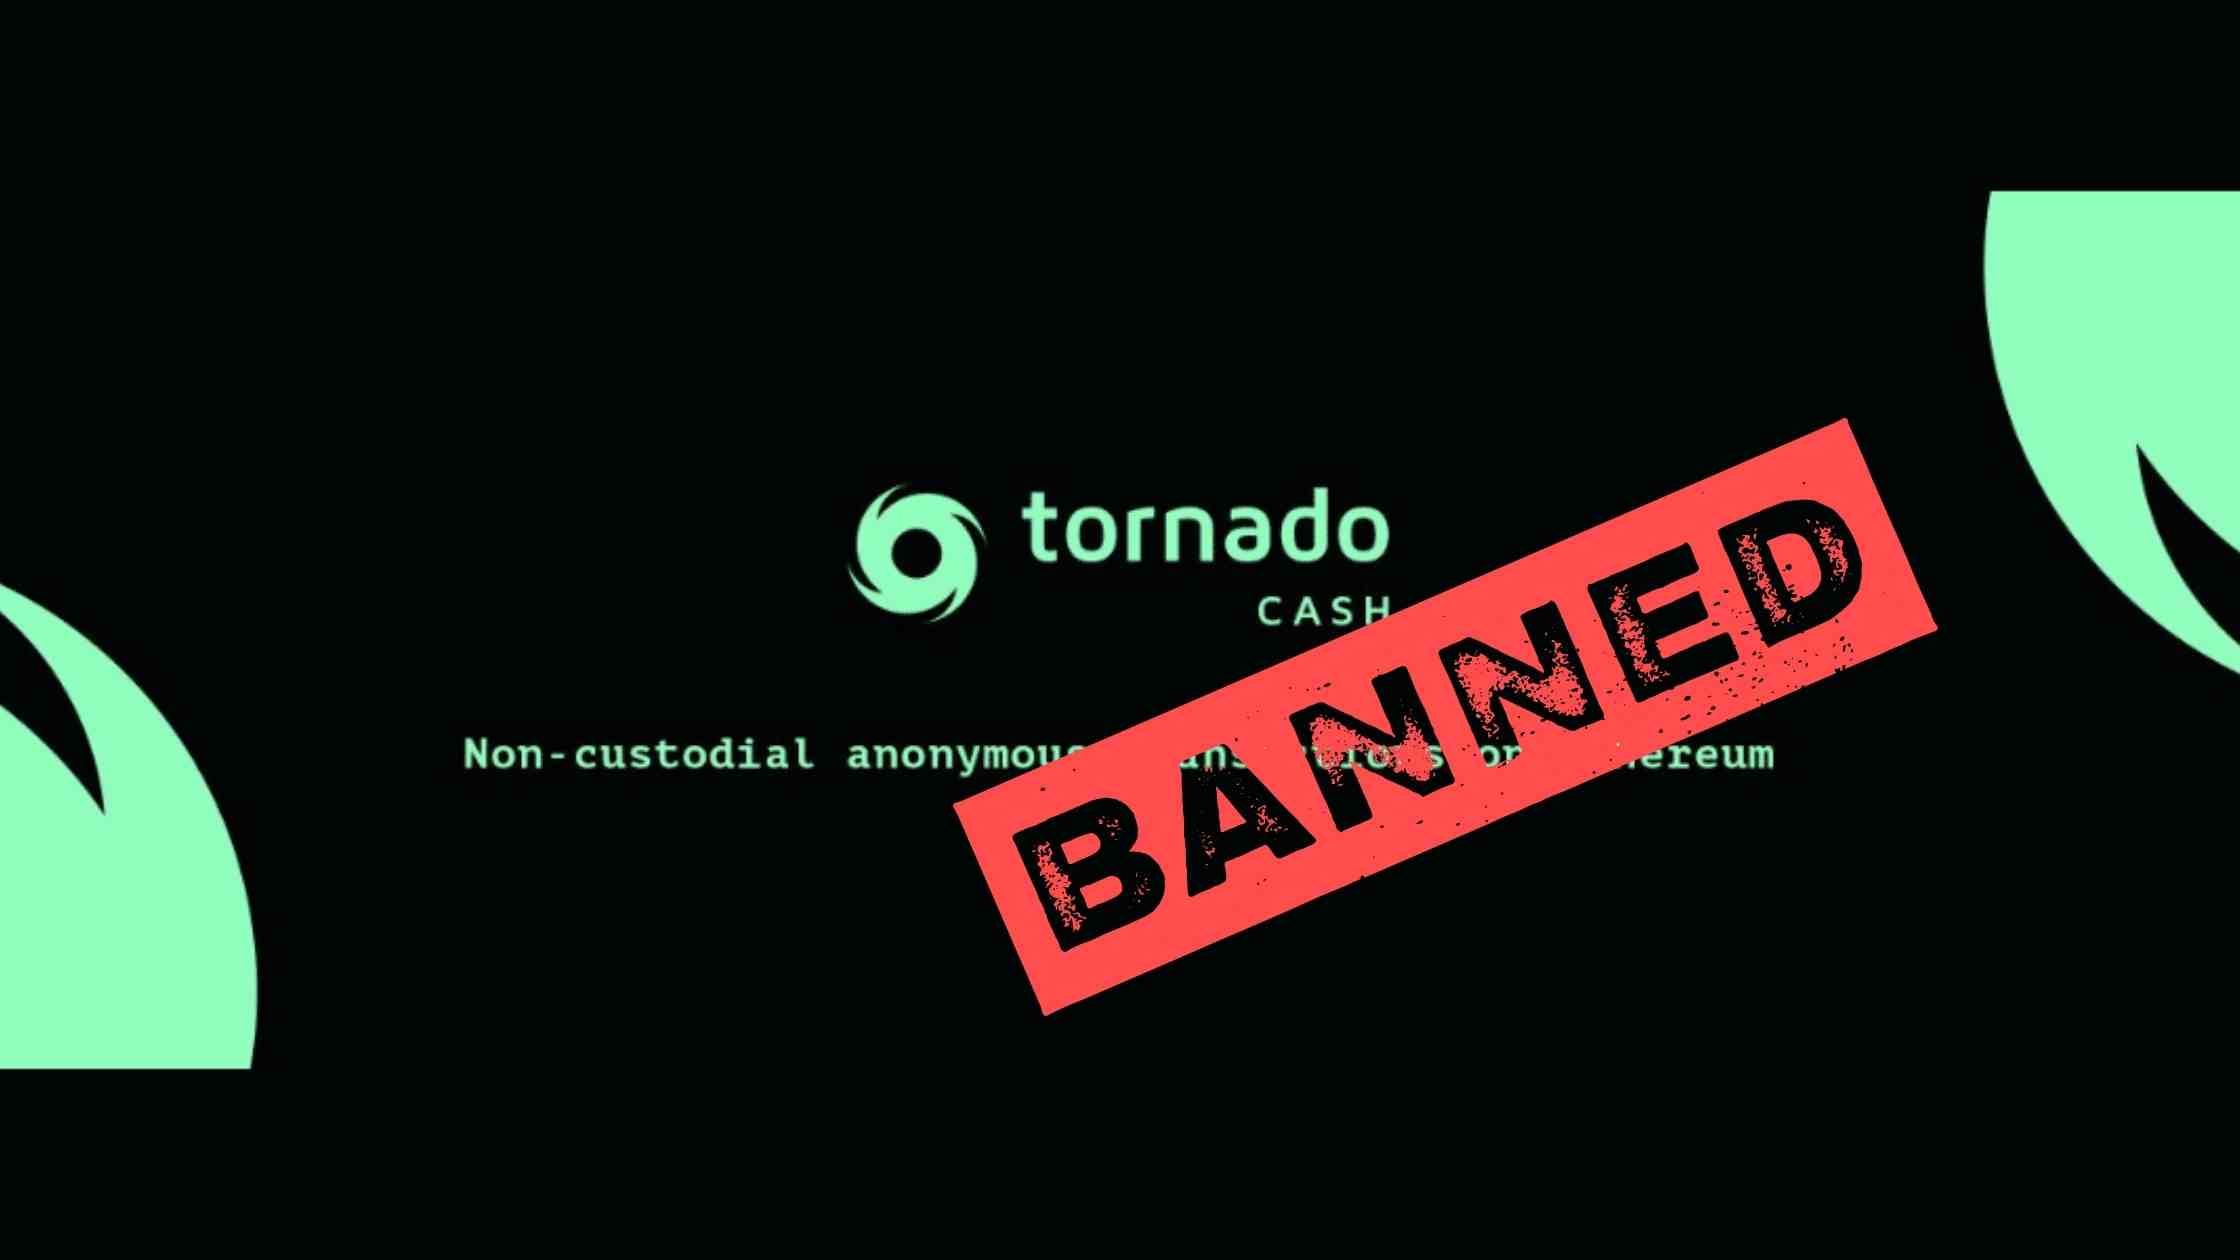 Tornado Cash Becomes the First Smart Contract Banned by the U.S. Government